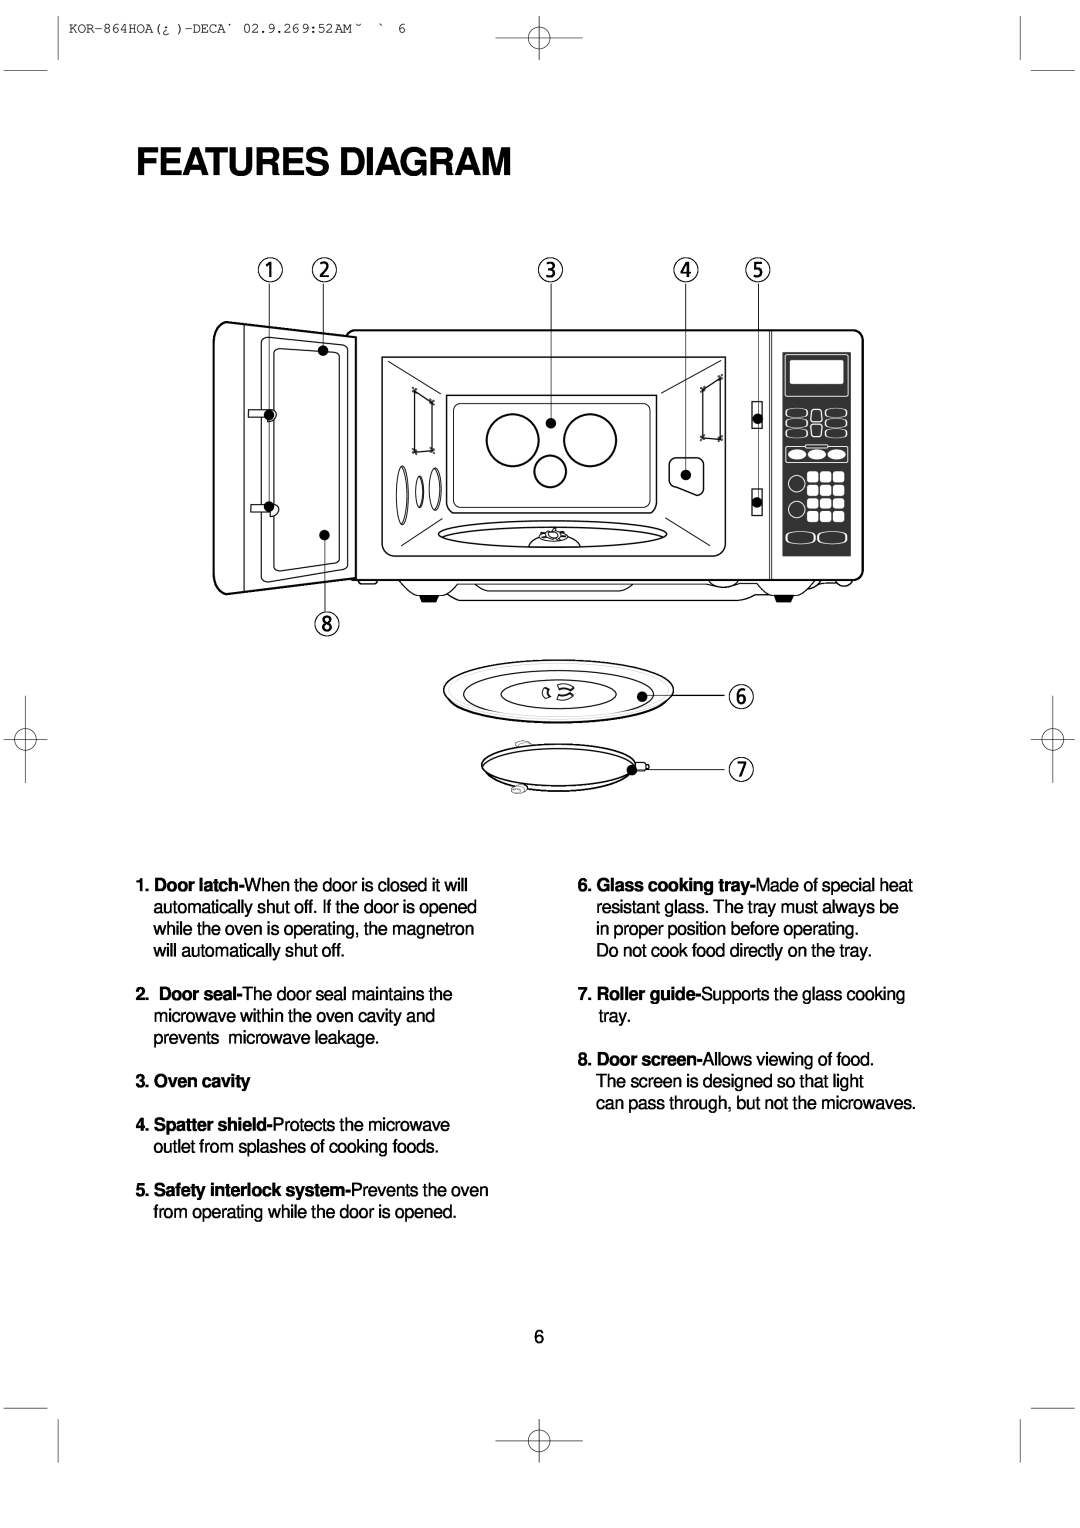 Daewoo KOR-864H operating instructions Features Diagram, Oven cavity 